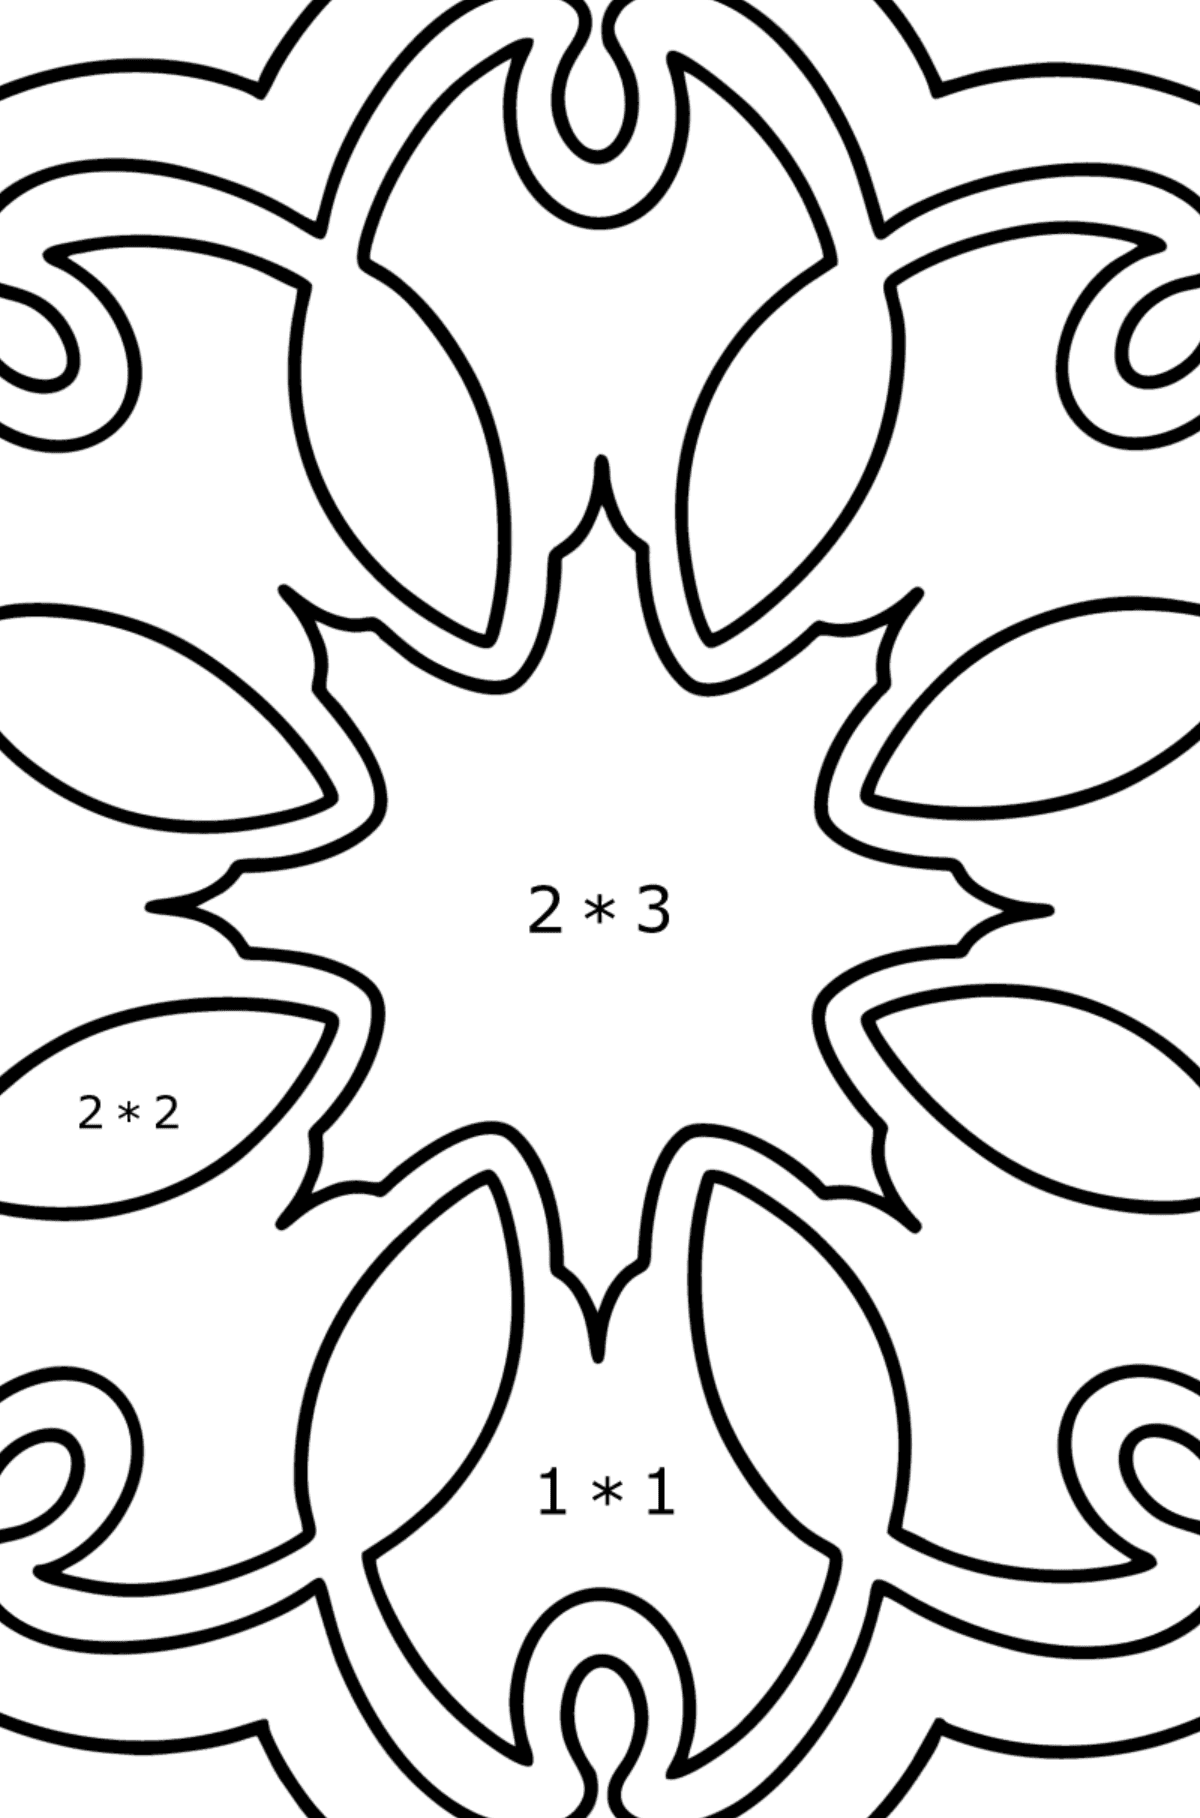 Mandala coloring page - 4 elements - Math Coloring - Multiplication for Kids